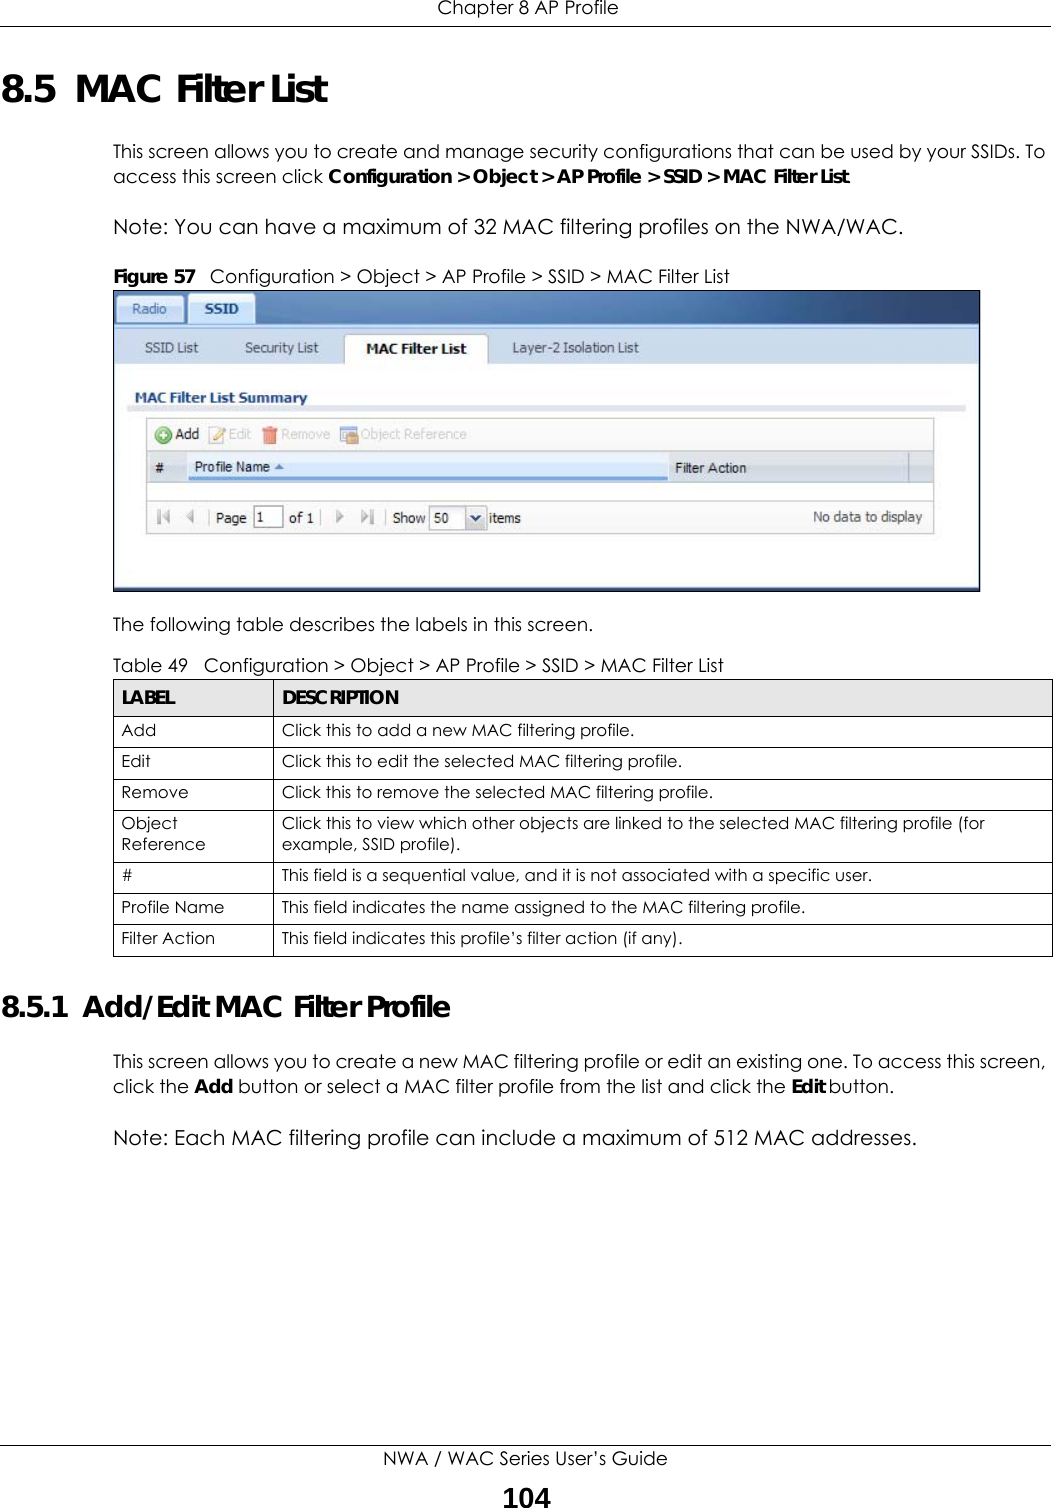  Chapter 8 AP ProfileNWA / WAC Series User’s Guide1048.5  MAC Filter ListThis screen allows you to create and manage security configurations that can be used by your SSIDs. To access this screen click Configuration &gt; Object &gt; AP Profile &gt; SSID &gt; MAC Filter List.Note: You can have a maximum of 32 MAC filtering profiles on the NWA/WAC.Figure 57   Configuration &gt; Object &gt; AP Profile &gt; SSID &gt; MAC Filter ListThe following table describes the labels in this screen.  8.5.1  Add/Edit MAC Filter ProfileThis screen allows you to create a new MAC filtering profile or edit an existing one. To access this screen, click the Add button or select a MAC filter profile from the list and click the Edit button.Note: Each MAC filtering profile can include a maximum of 512 MAC addresses.Table 49   Configuration &gt; Object &gt; AP Profile &gt; SSID &gt; MAC Filter ListLABEL DESCRIPTIONAdd Click this to add a new MAC filtering profile.Edit Click this to edit the selected MAC filtering profile.Remove Click this to remove the selected MAC filtering profile.Object ReferenceClick this to view which other objects are linked to the selected MAC filtering profile (for example, SSID profile).# This field is a sequential value, and it is not associated with a specific user.Profile Name This field indicates the name assigned to the MAC filtering profile.Filter Action This field indicates this profile’s filter action (if any).